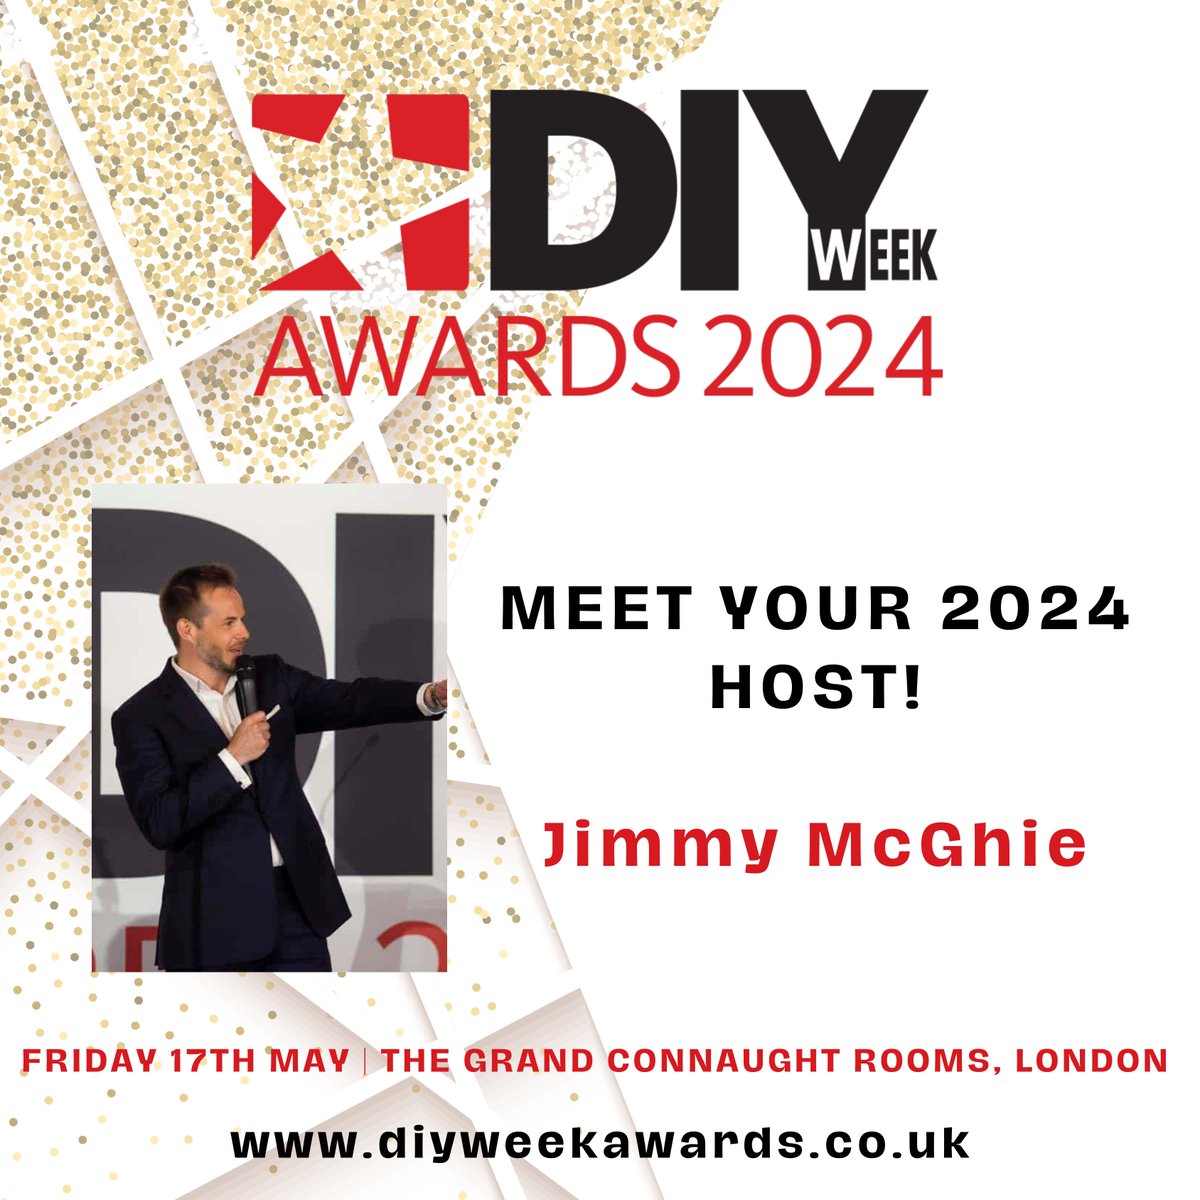 Meet your 2024 host.. Jimmy McGhie! 

Jimmy has performed stand up all over the world and appeared on numerous television and radio  programmes.

Secure your seats now - diyweekawards.co.uk/book-tickets/ 

#DIY2024 #booktickets #dontmissout